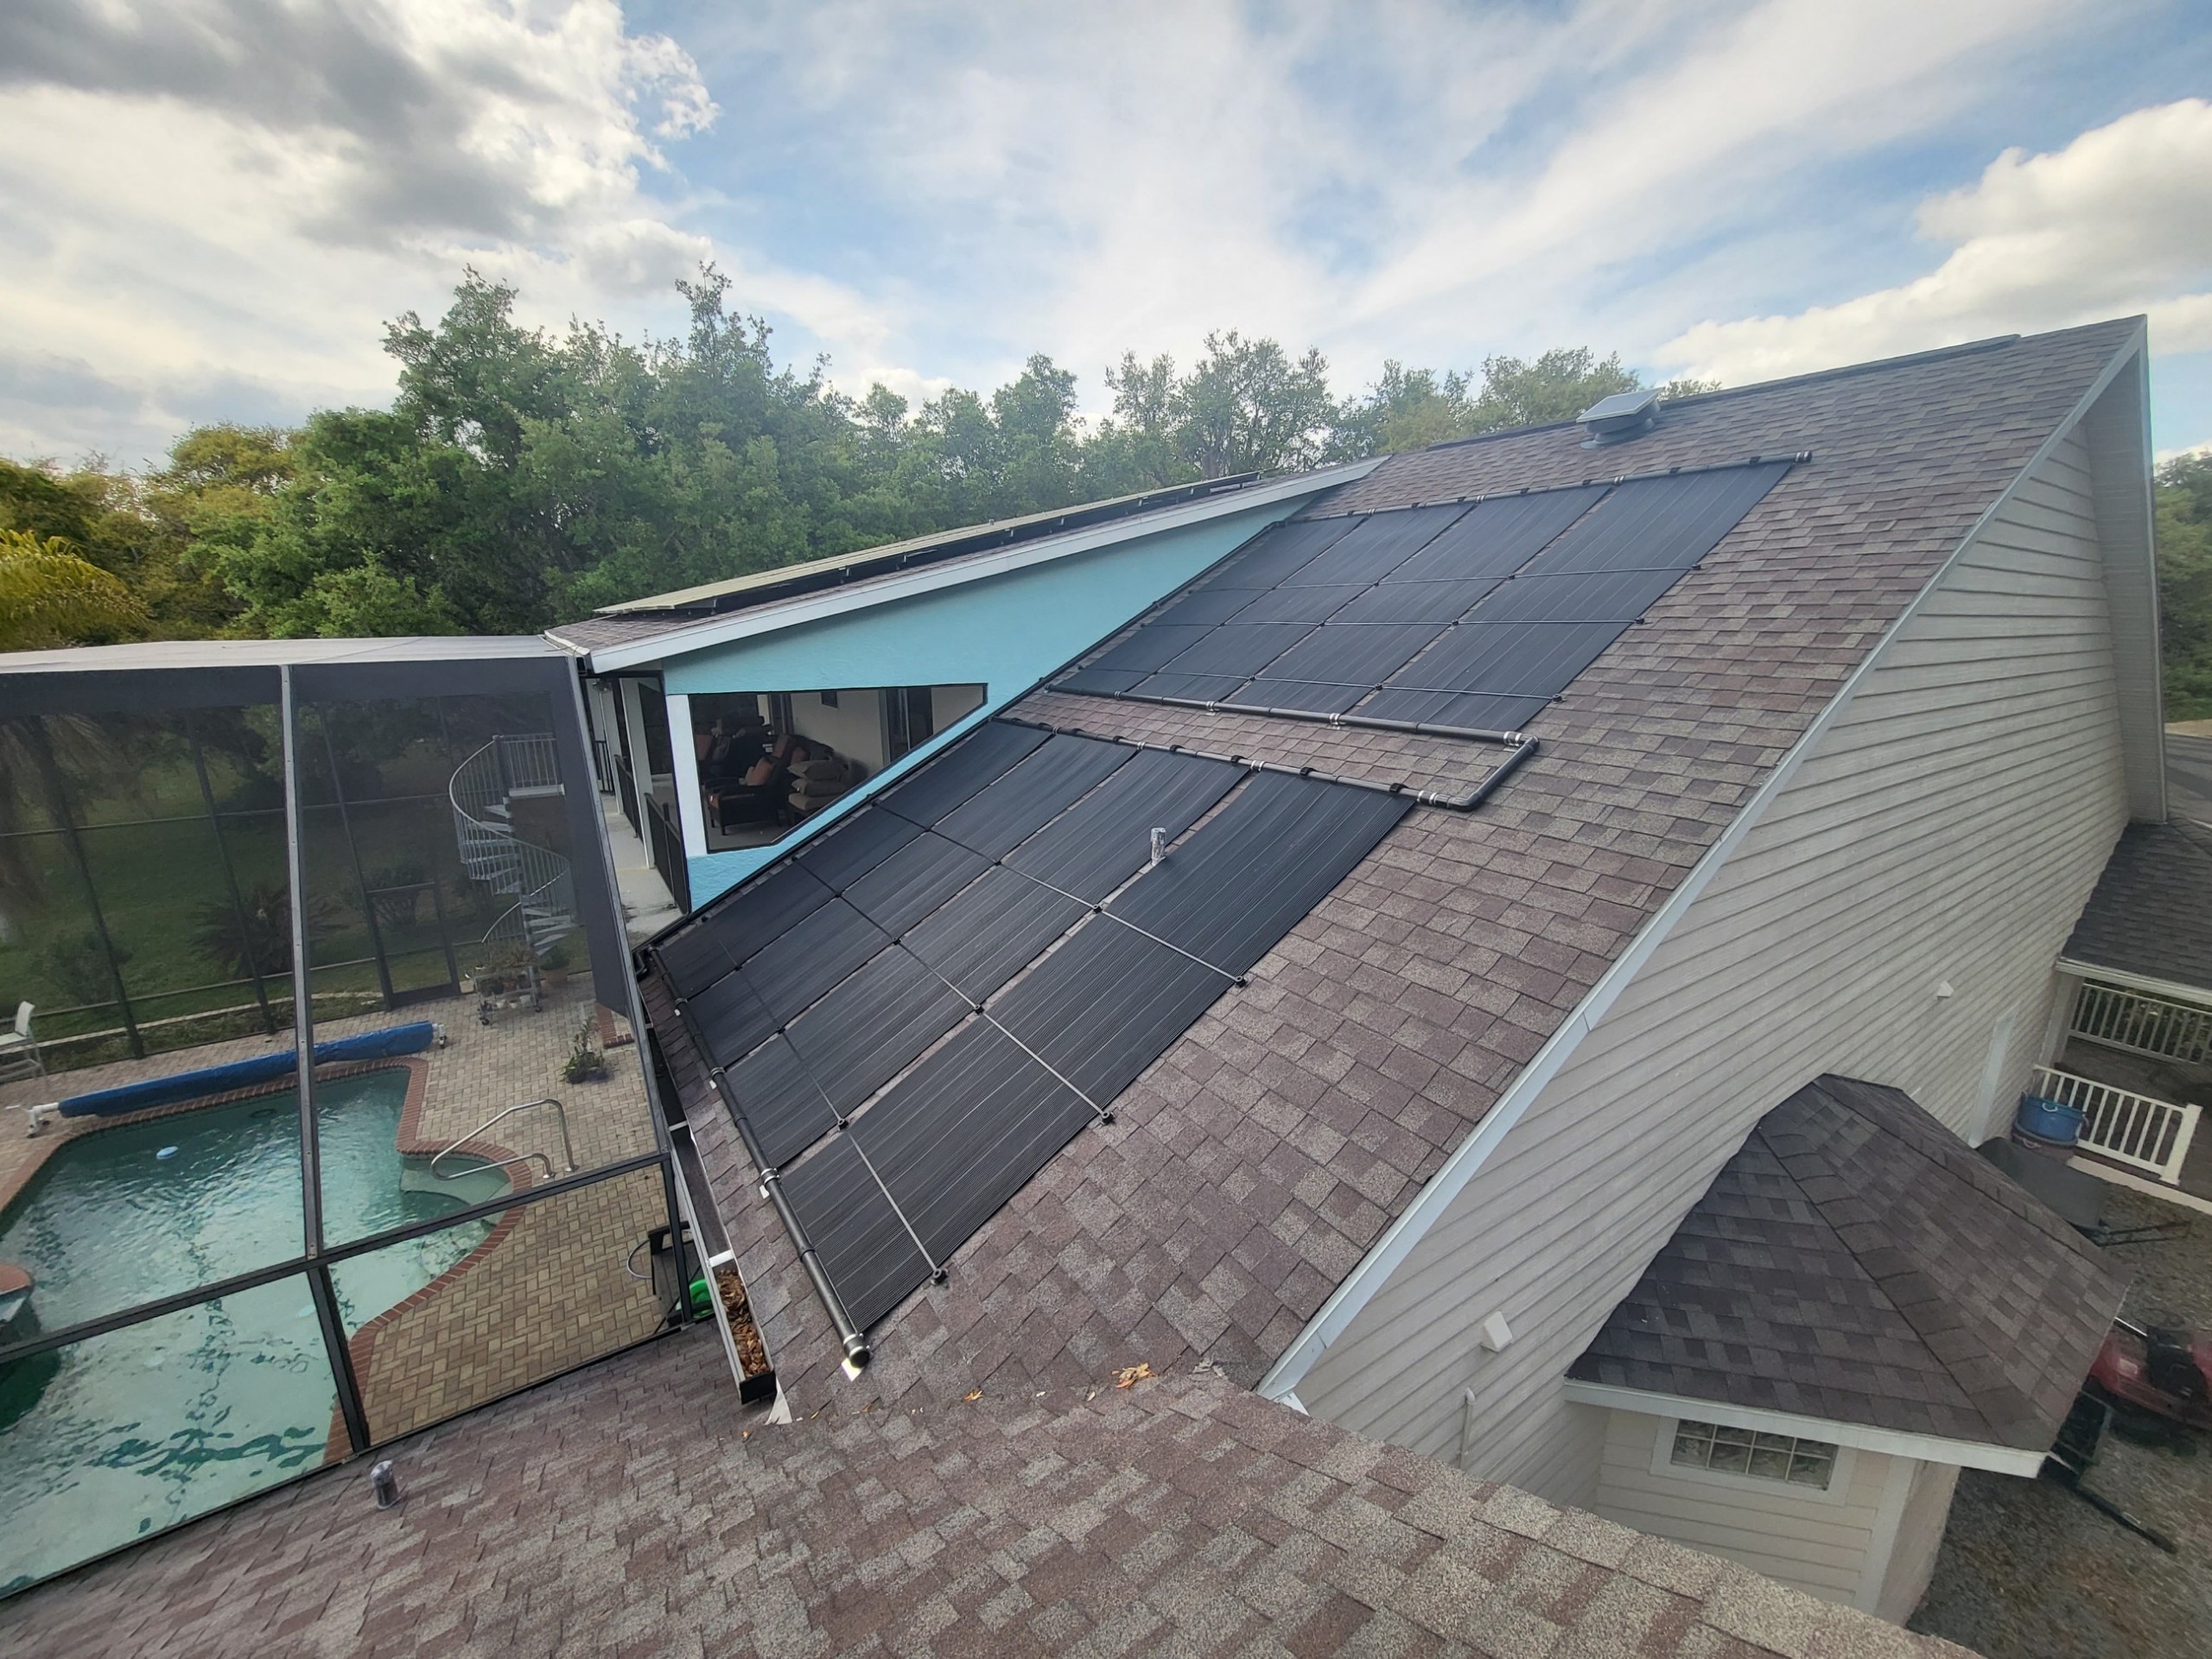 Solar Pool system and attic fan small box up top of roof